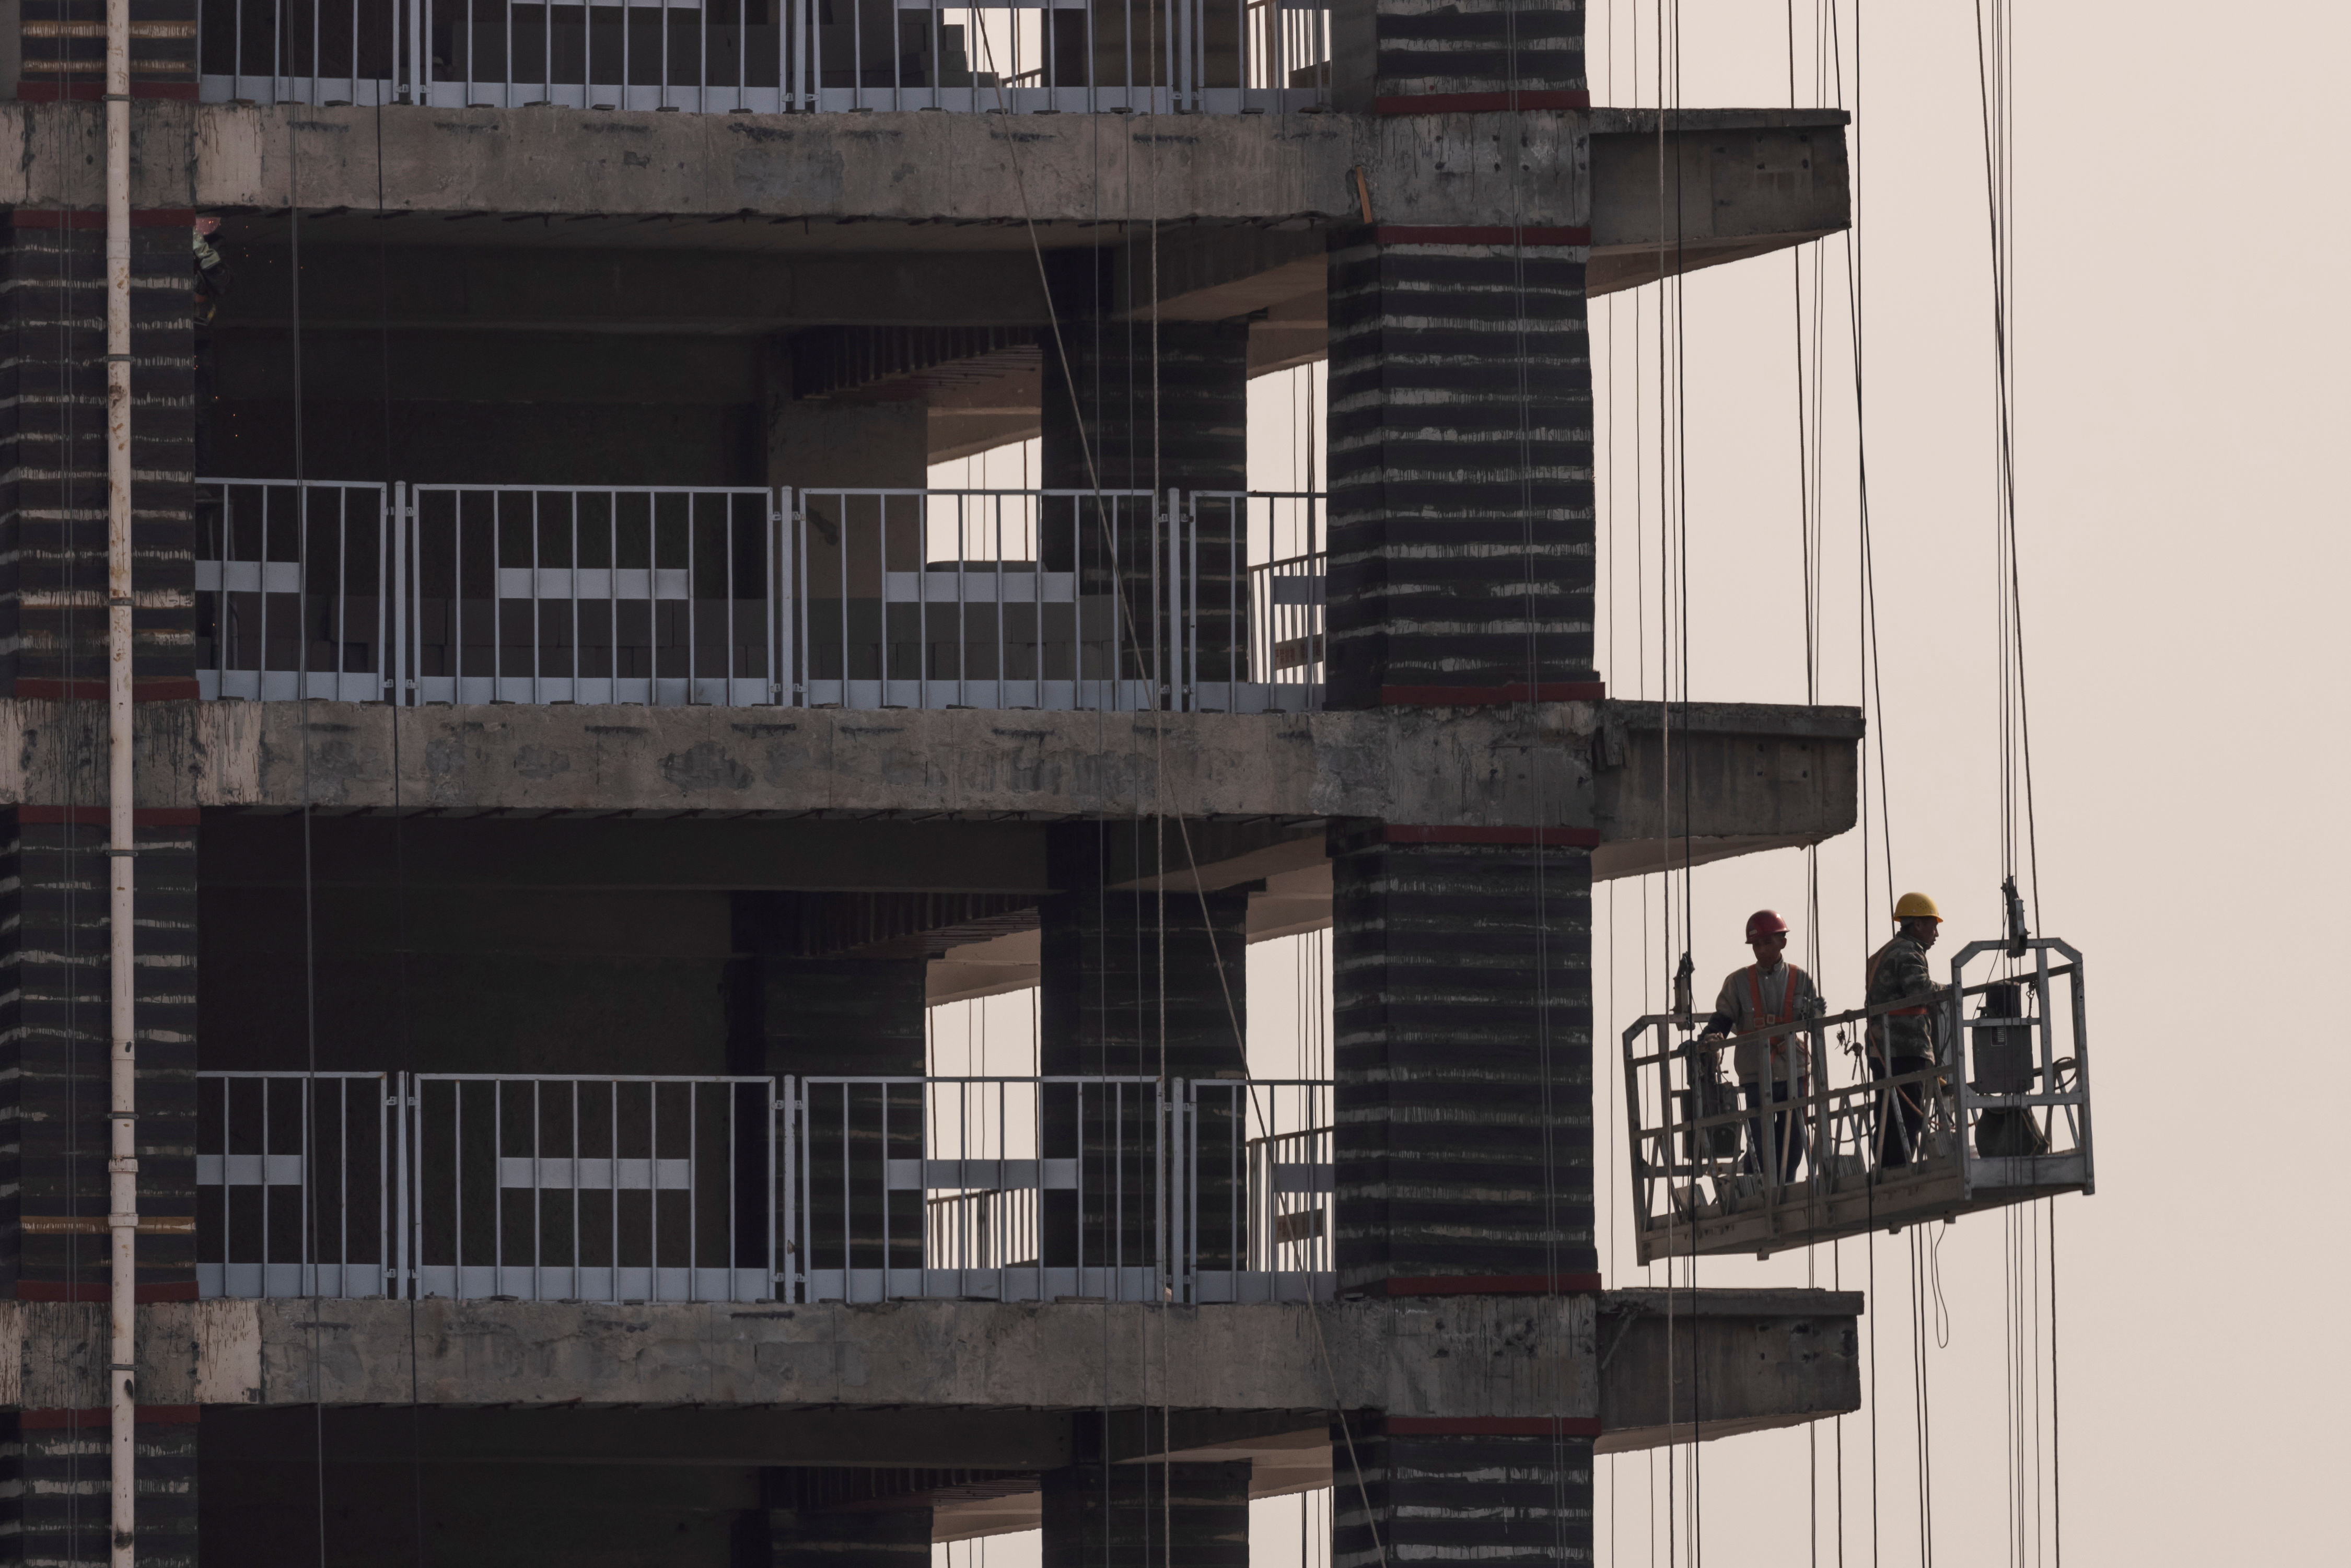 Men work at the construction site of a highrise building in Beijing, China, October 18, 2021.   REUTERS/Thomas Peter